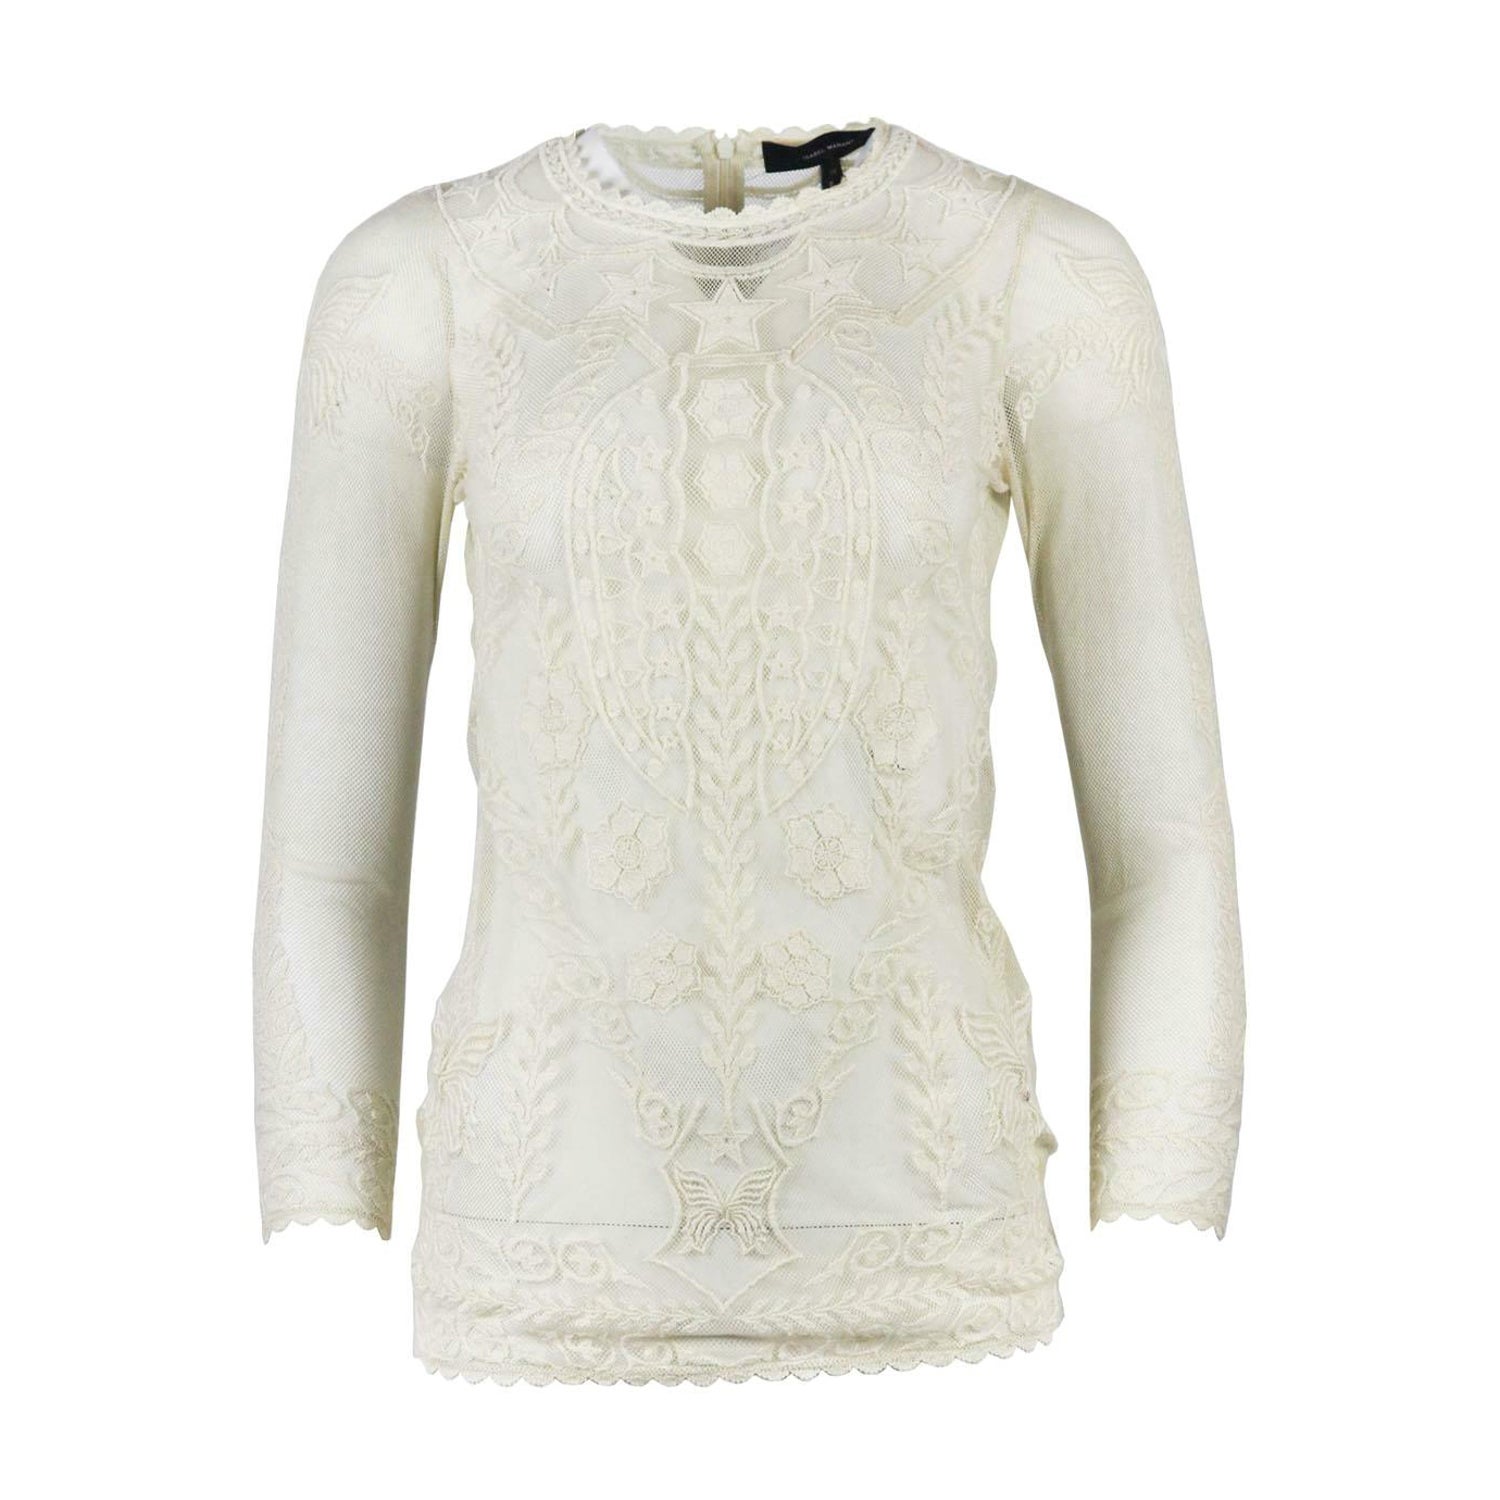 Marant Diane Embroidered Cotton Mesh Top For 1stDibs